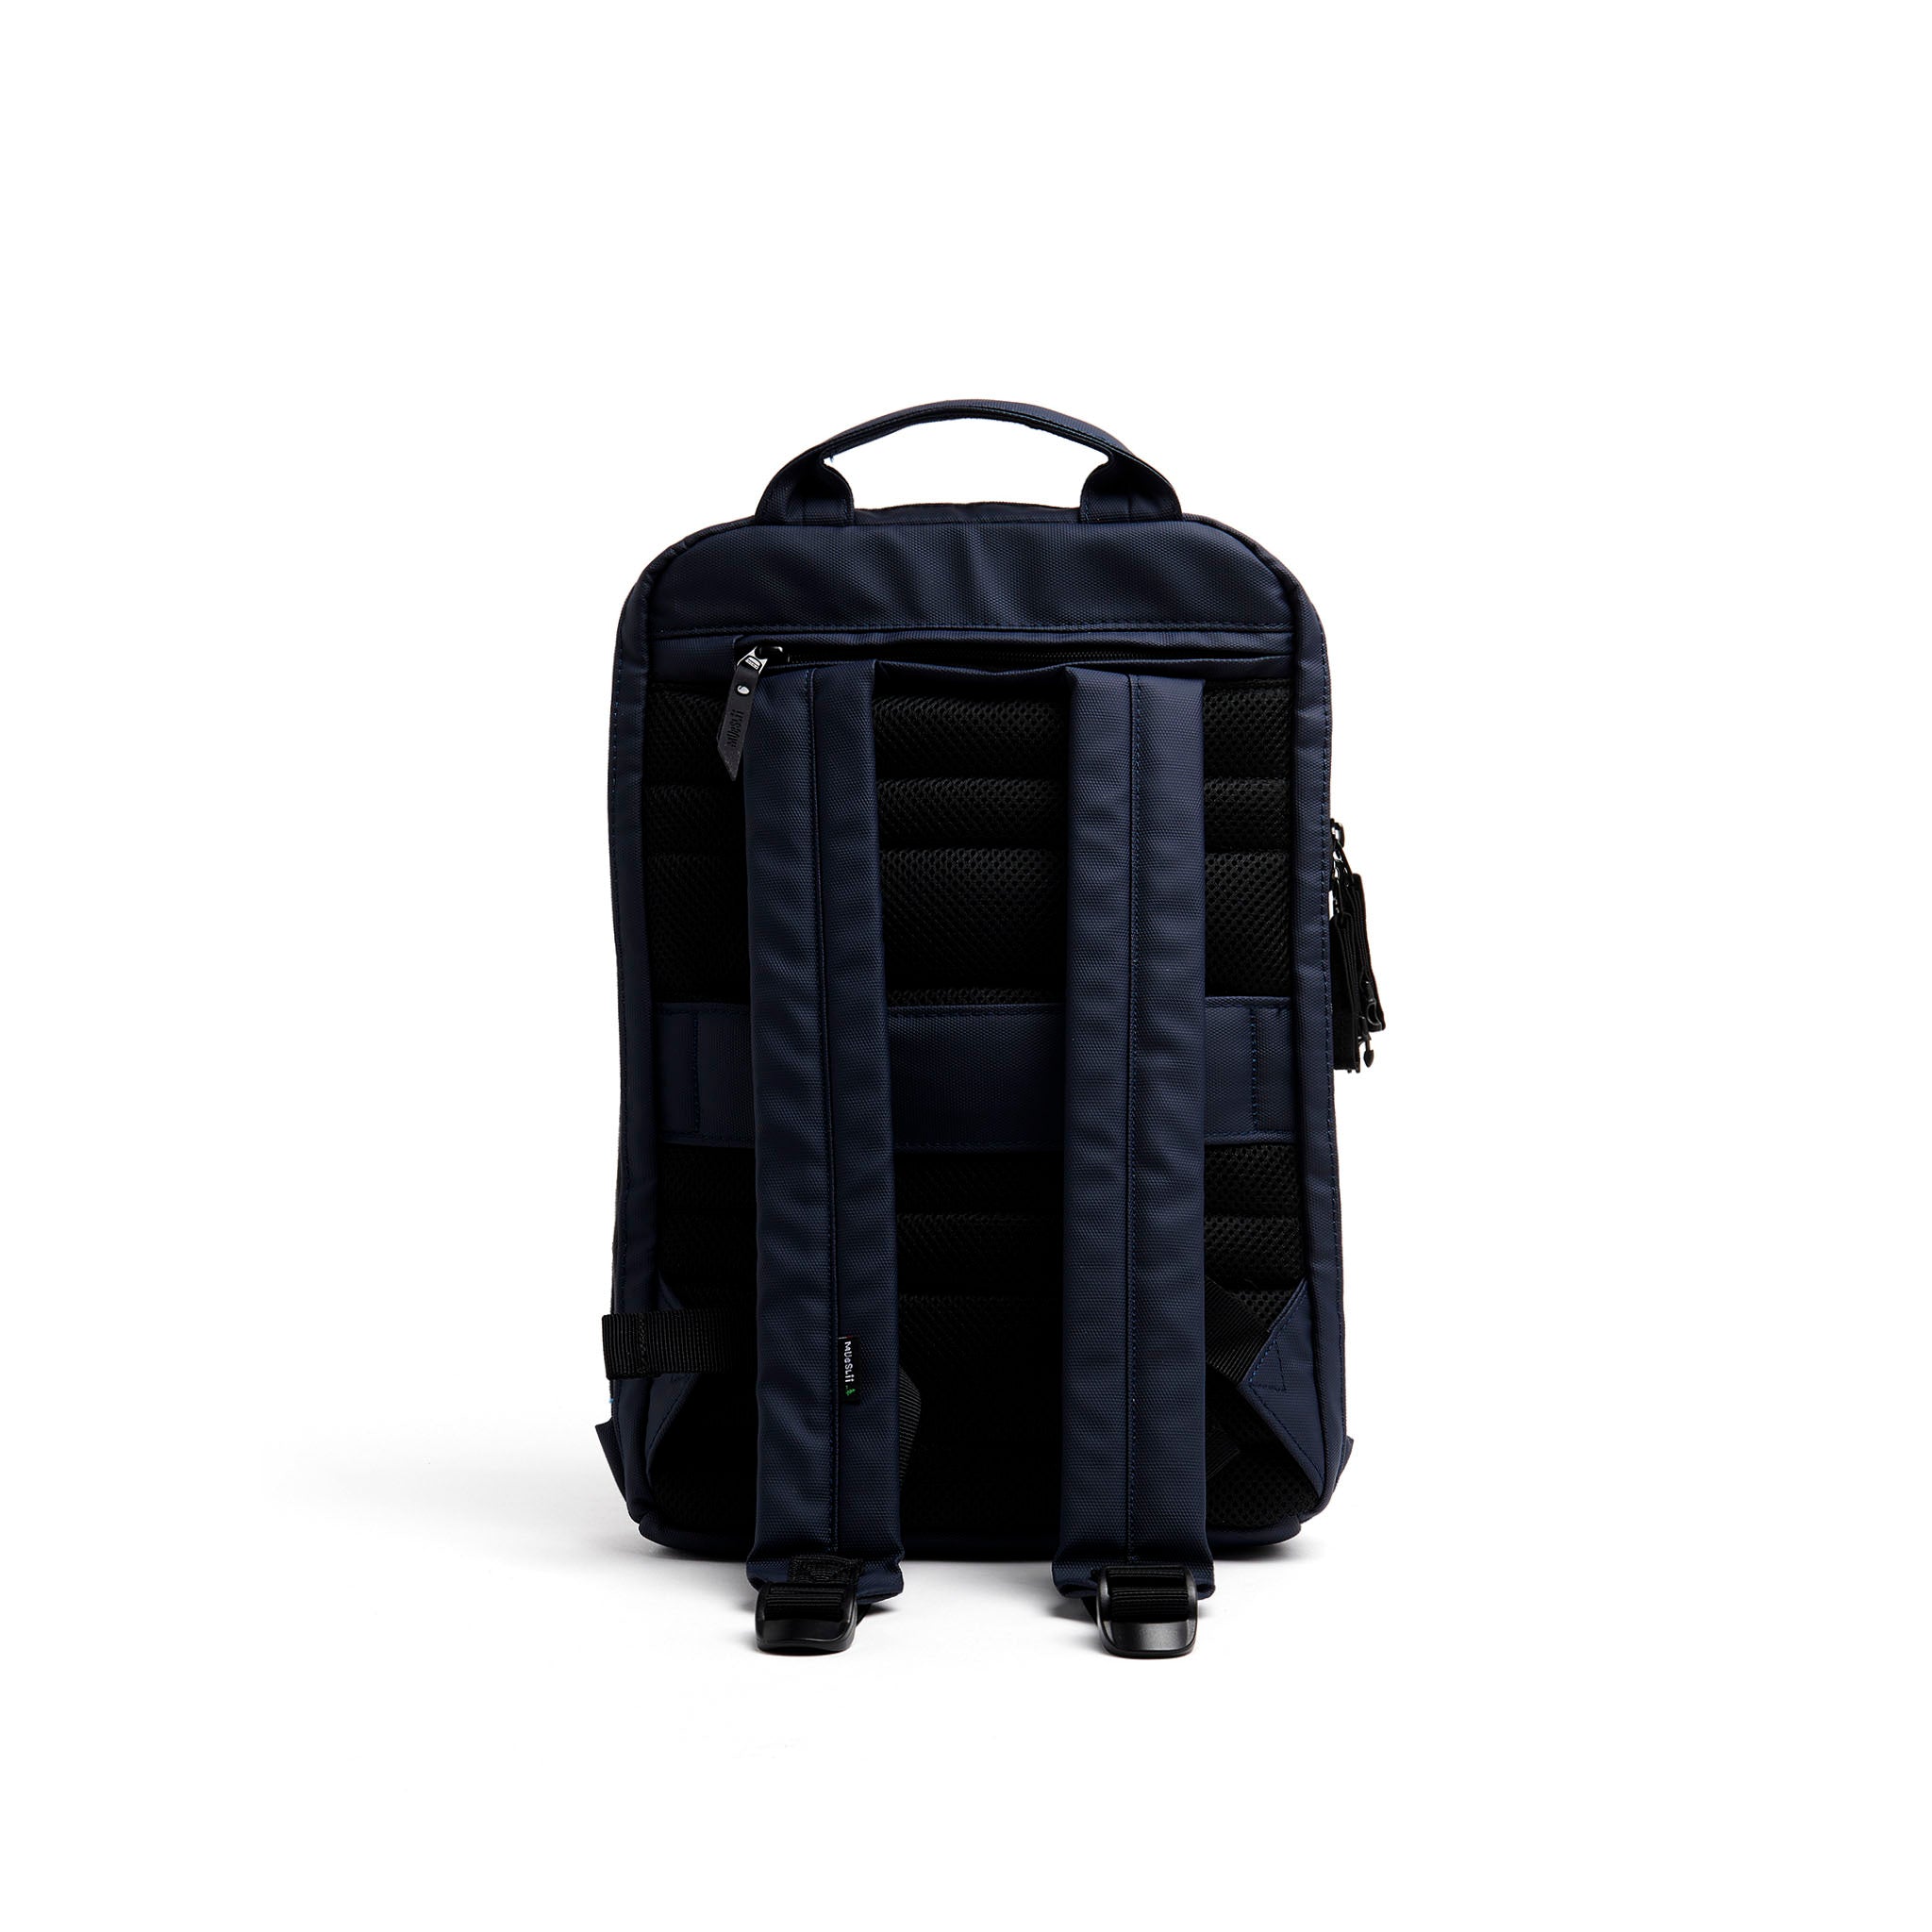 Mueslii small backpack, made of PU coated waterproof nylon, with a laptop compartment, color blue, back view.